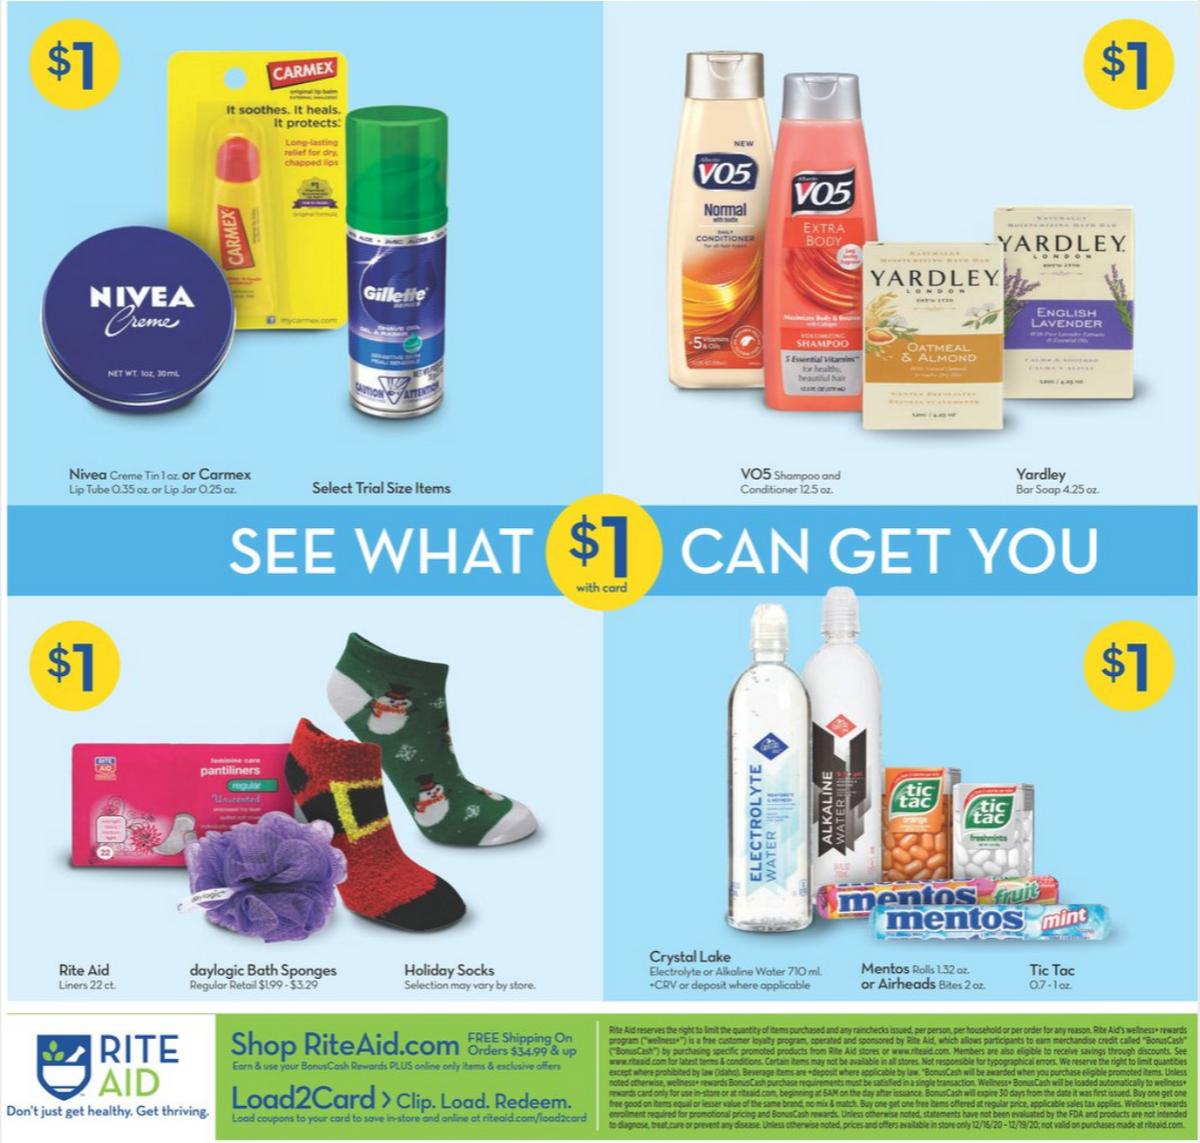 Rite Aid Additional Deals Weekly Ad from December 16